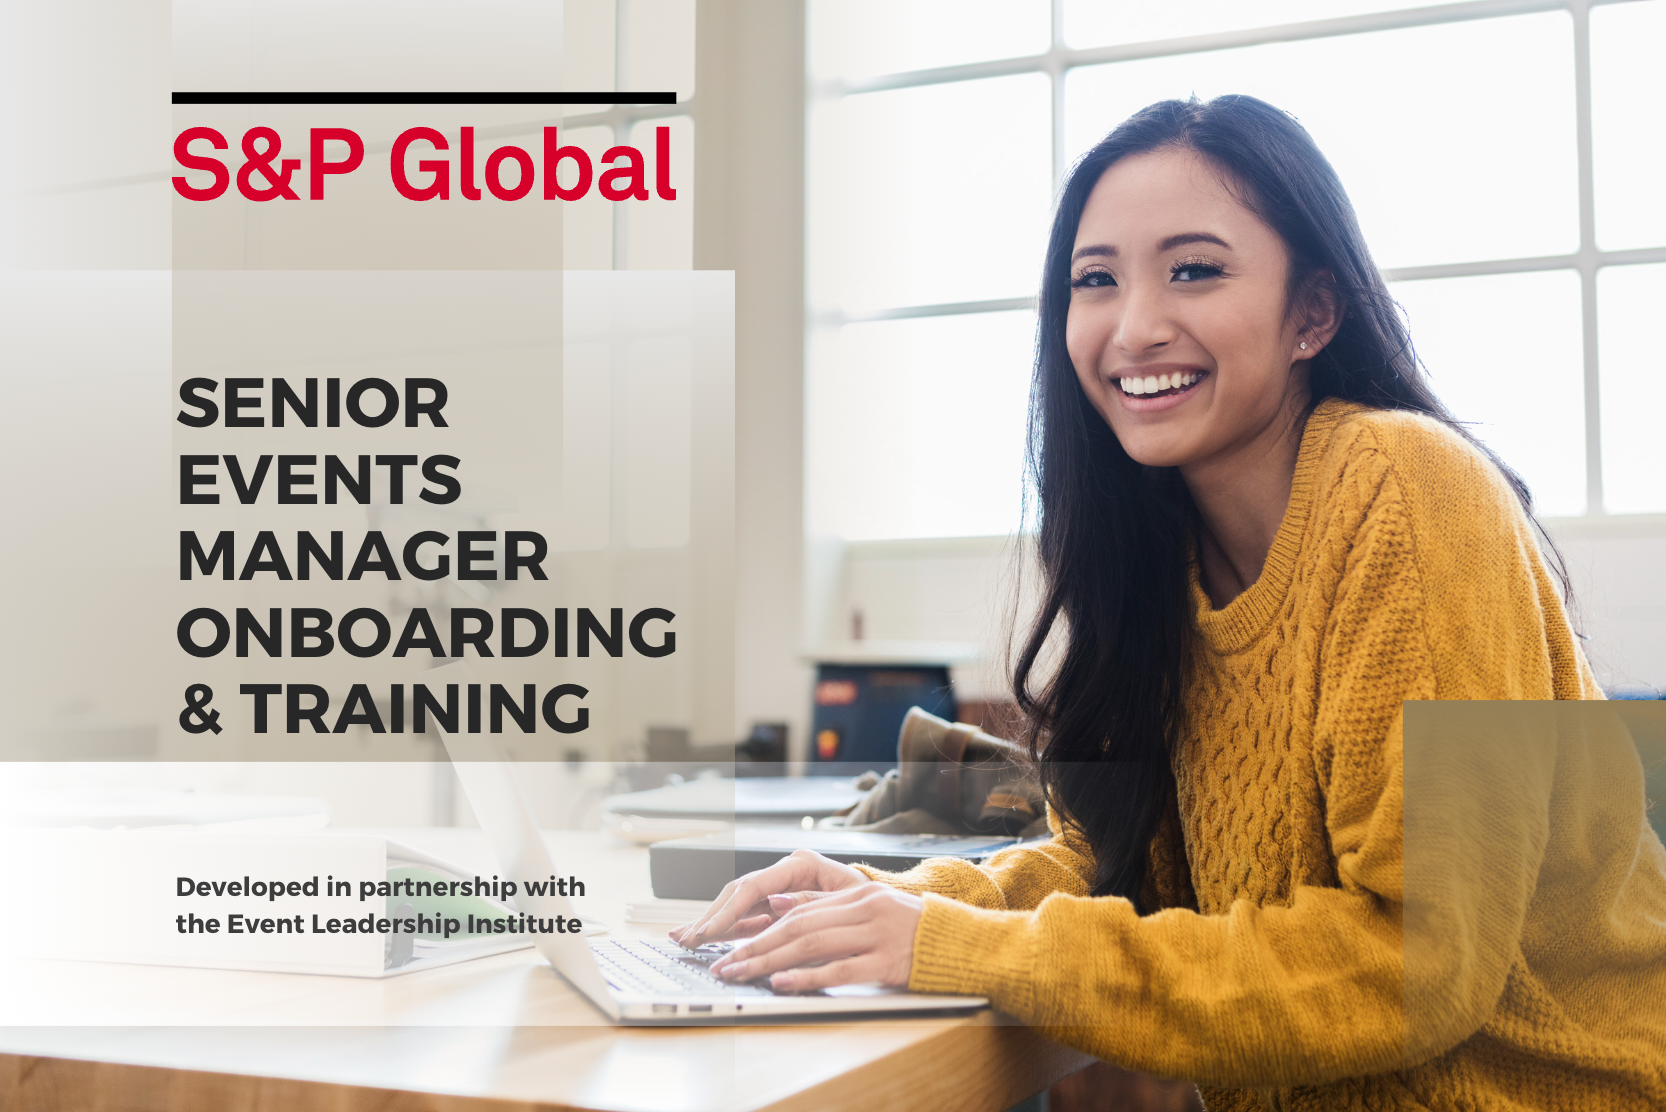 Protected: S&P Global | Senior Events Manager